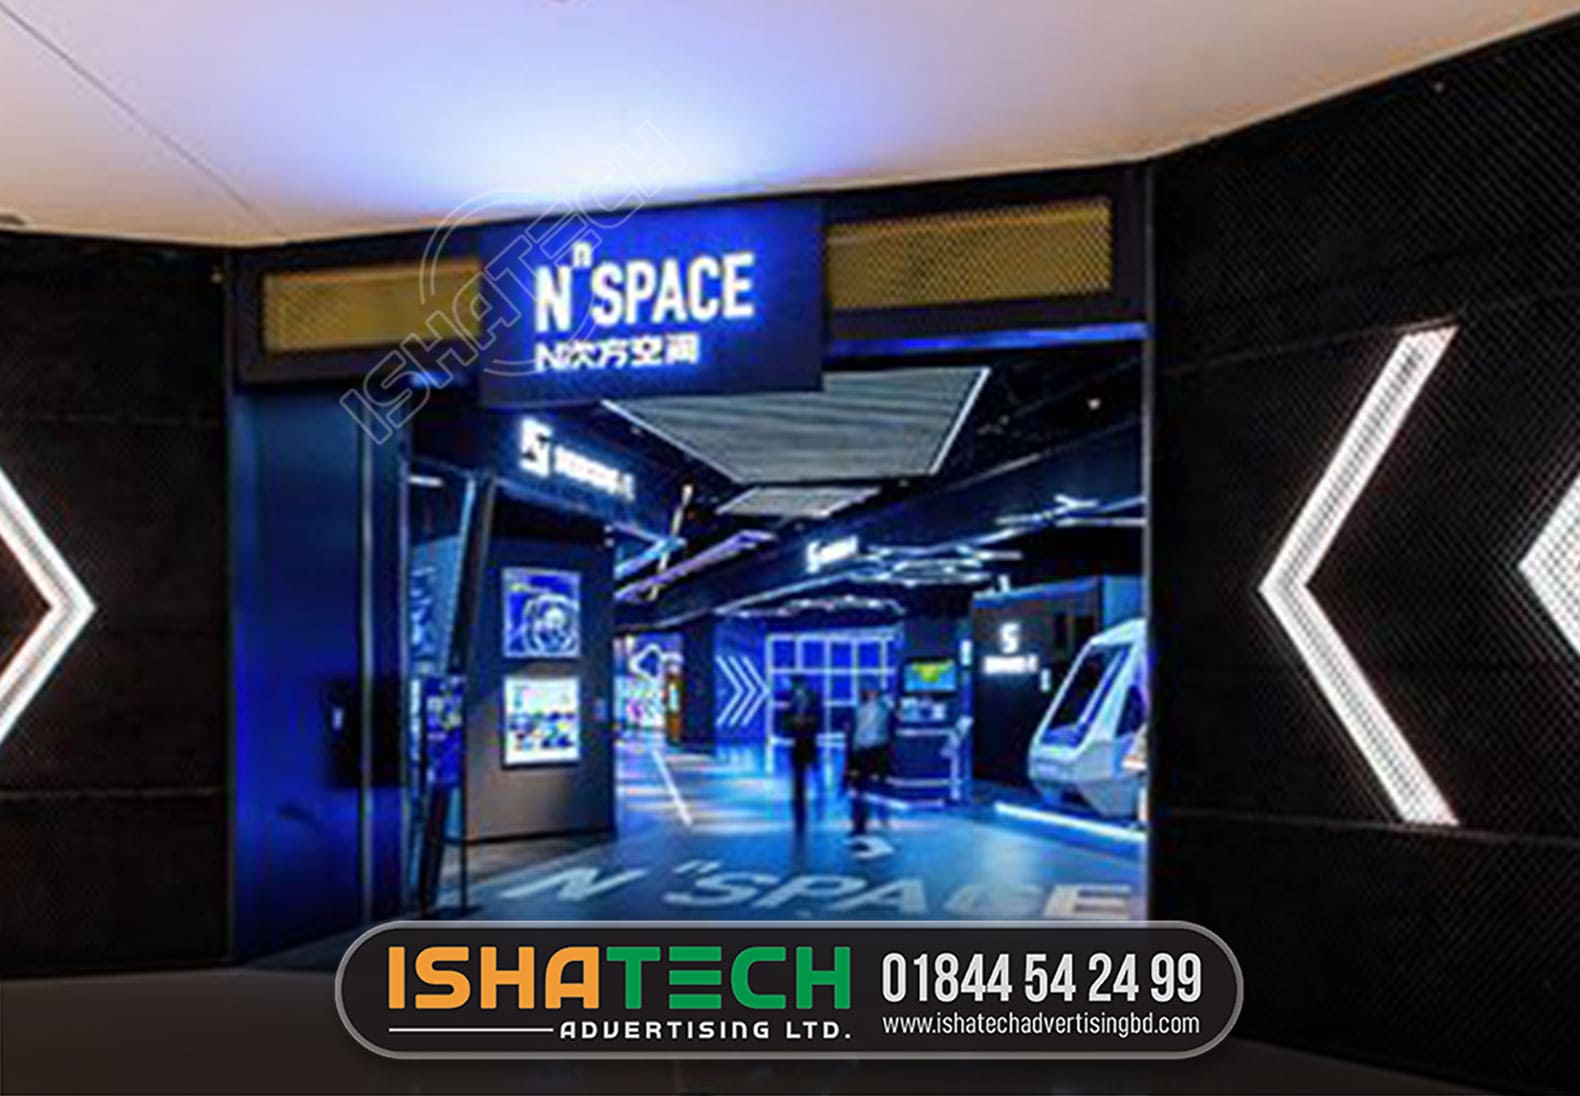 N SPACE SHOPPING MALL BRANDING LED SIGN BD, LED Signage Solutions | LG Bangladesh Business